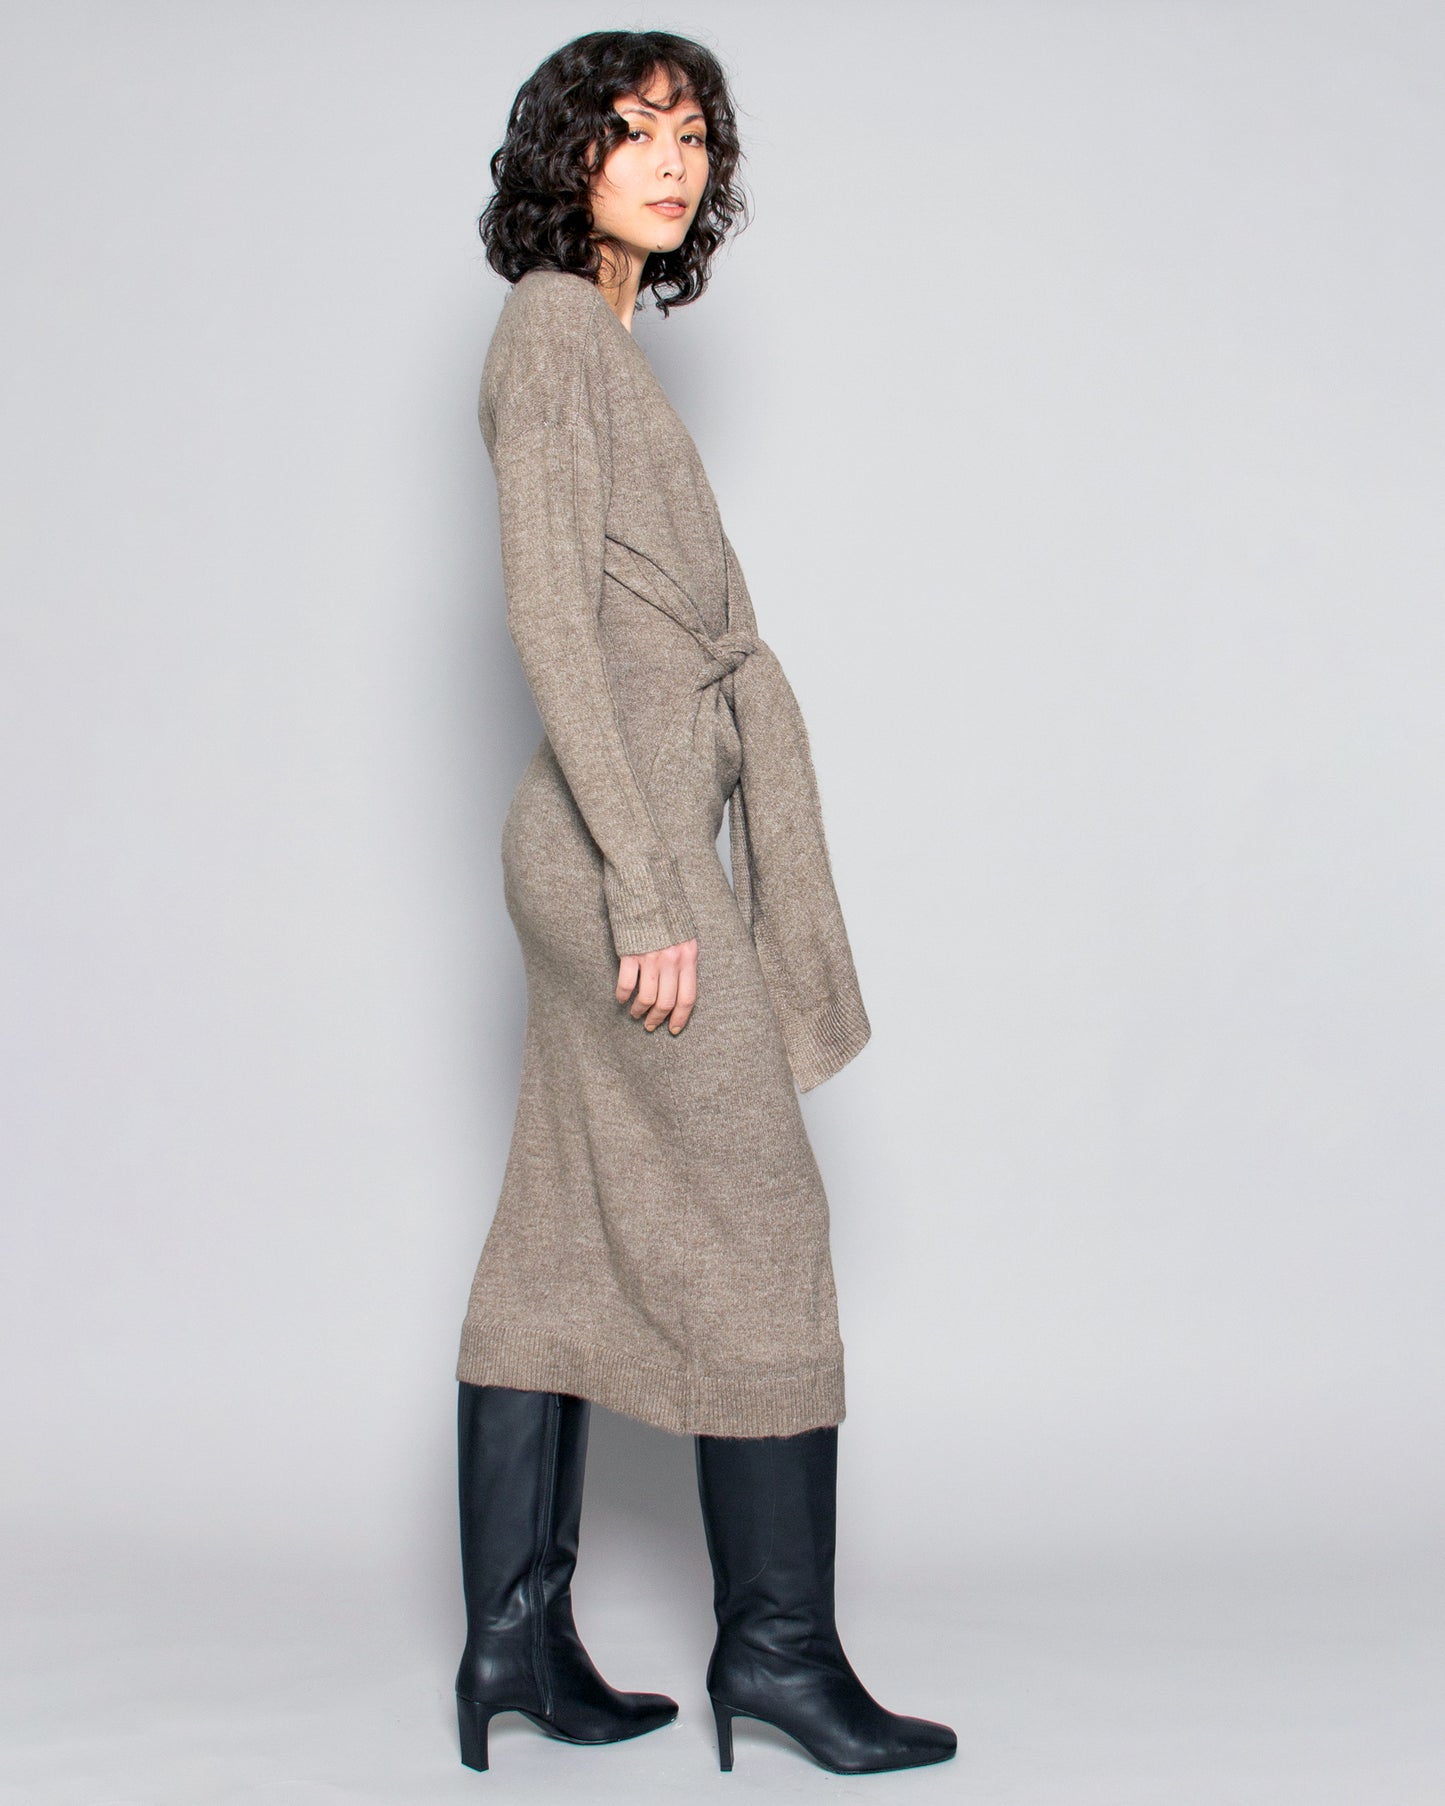 PERSONS Luna Tie Front Midi Dress in Grey Moss available at Lahn.shop